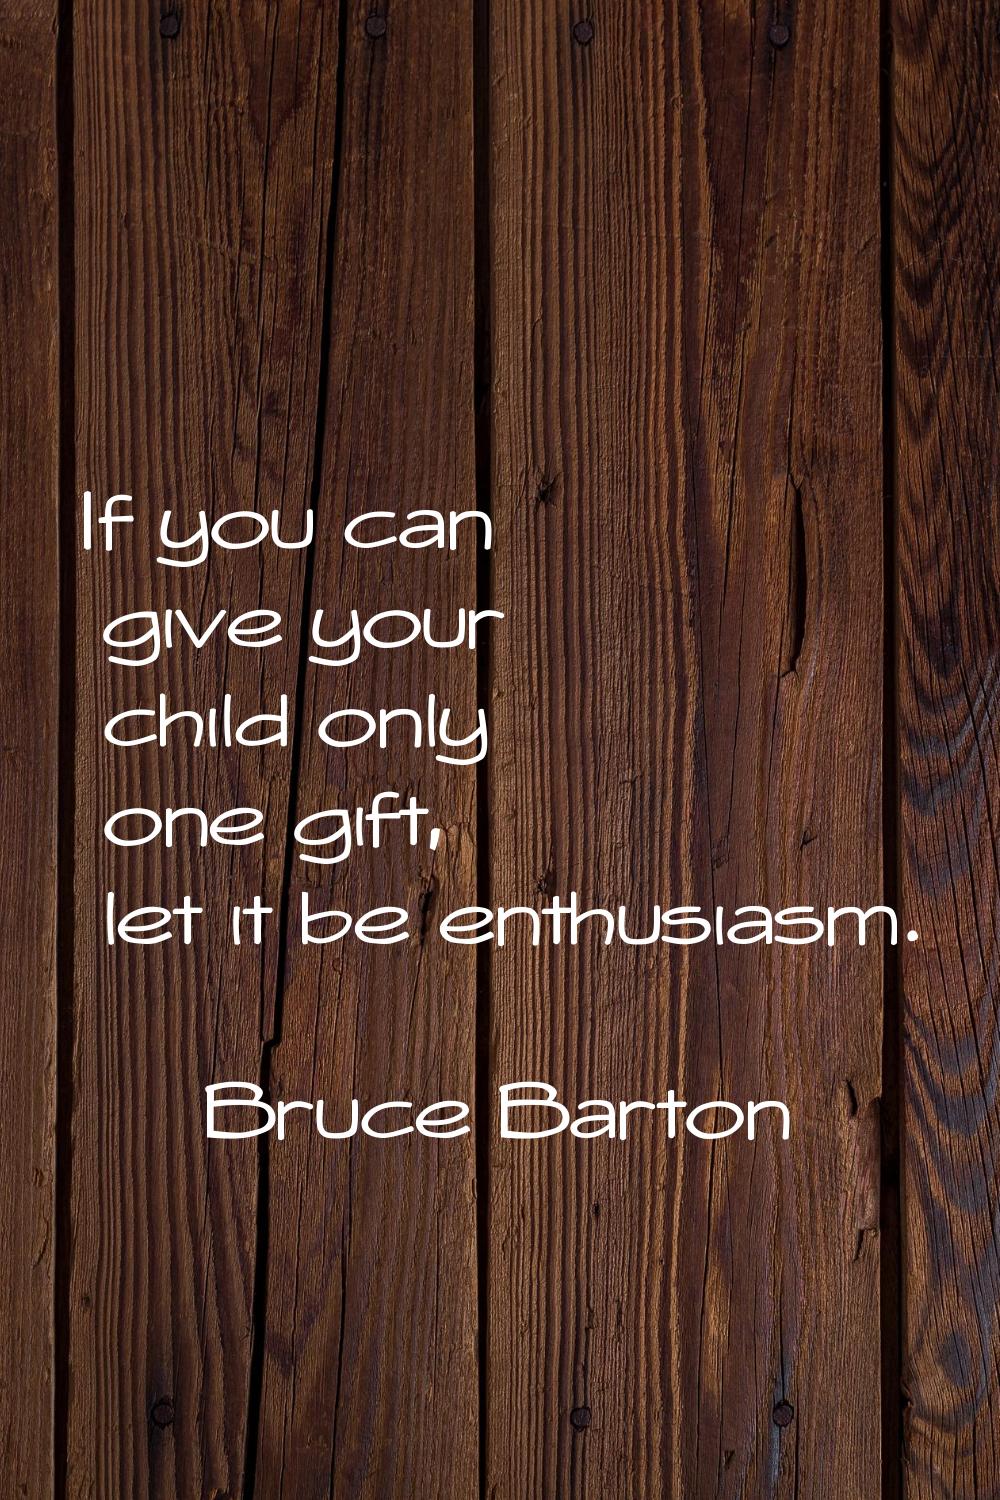 If you can give your child only one gift, let it be enthusiasm.